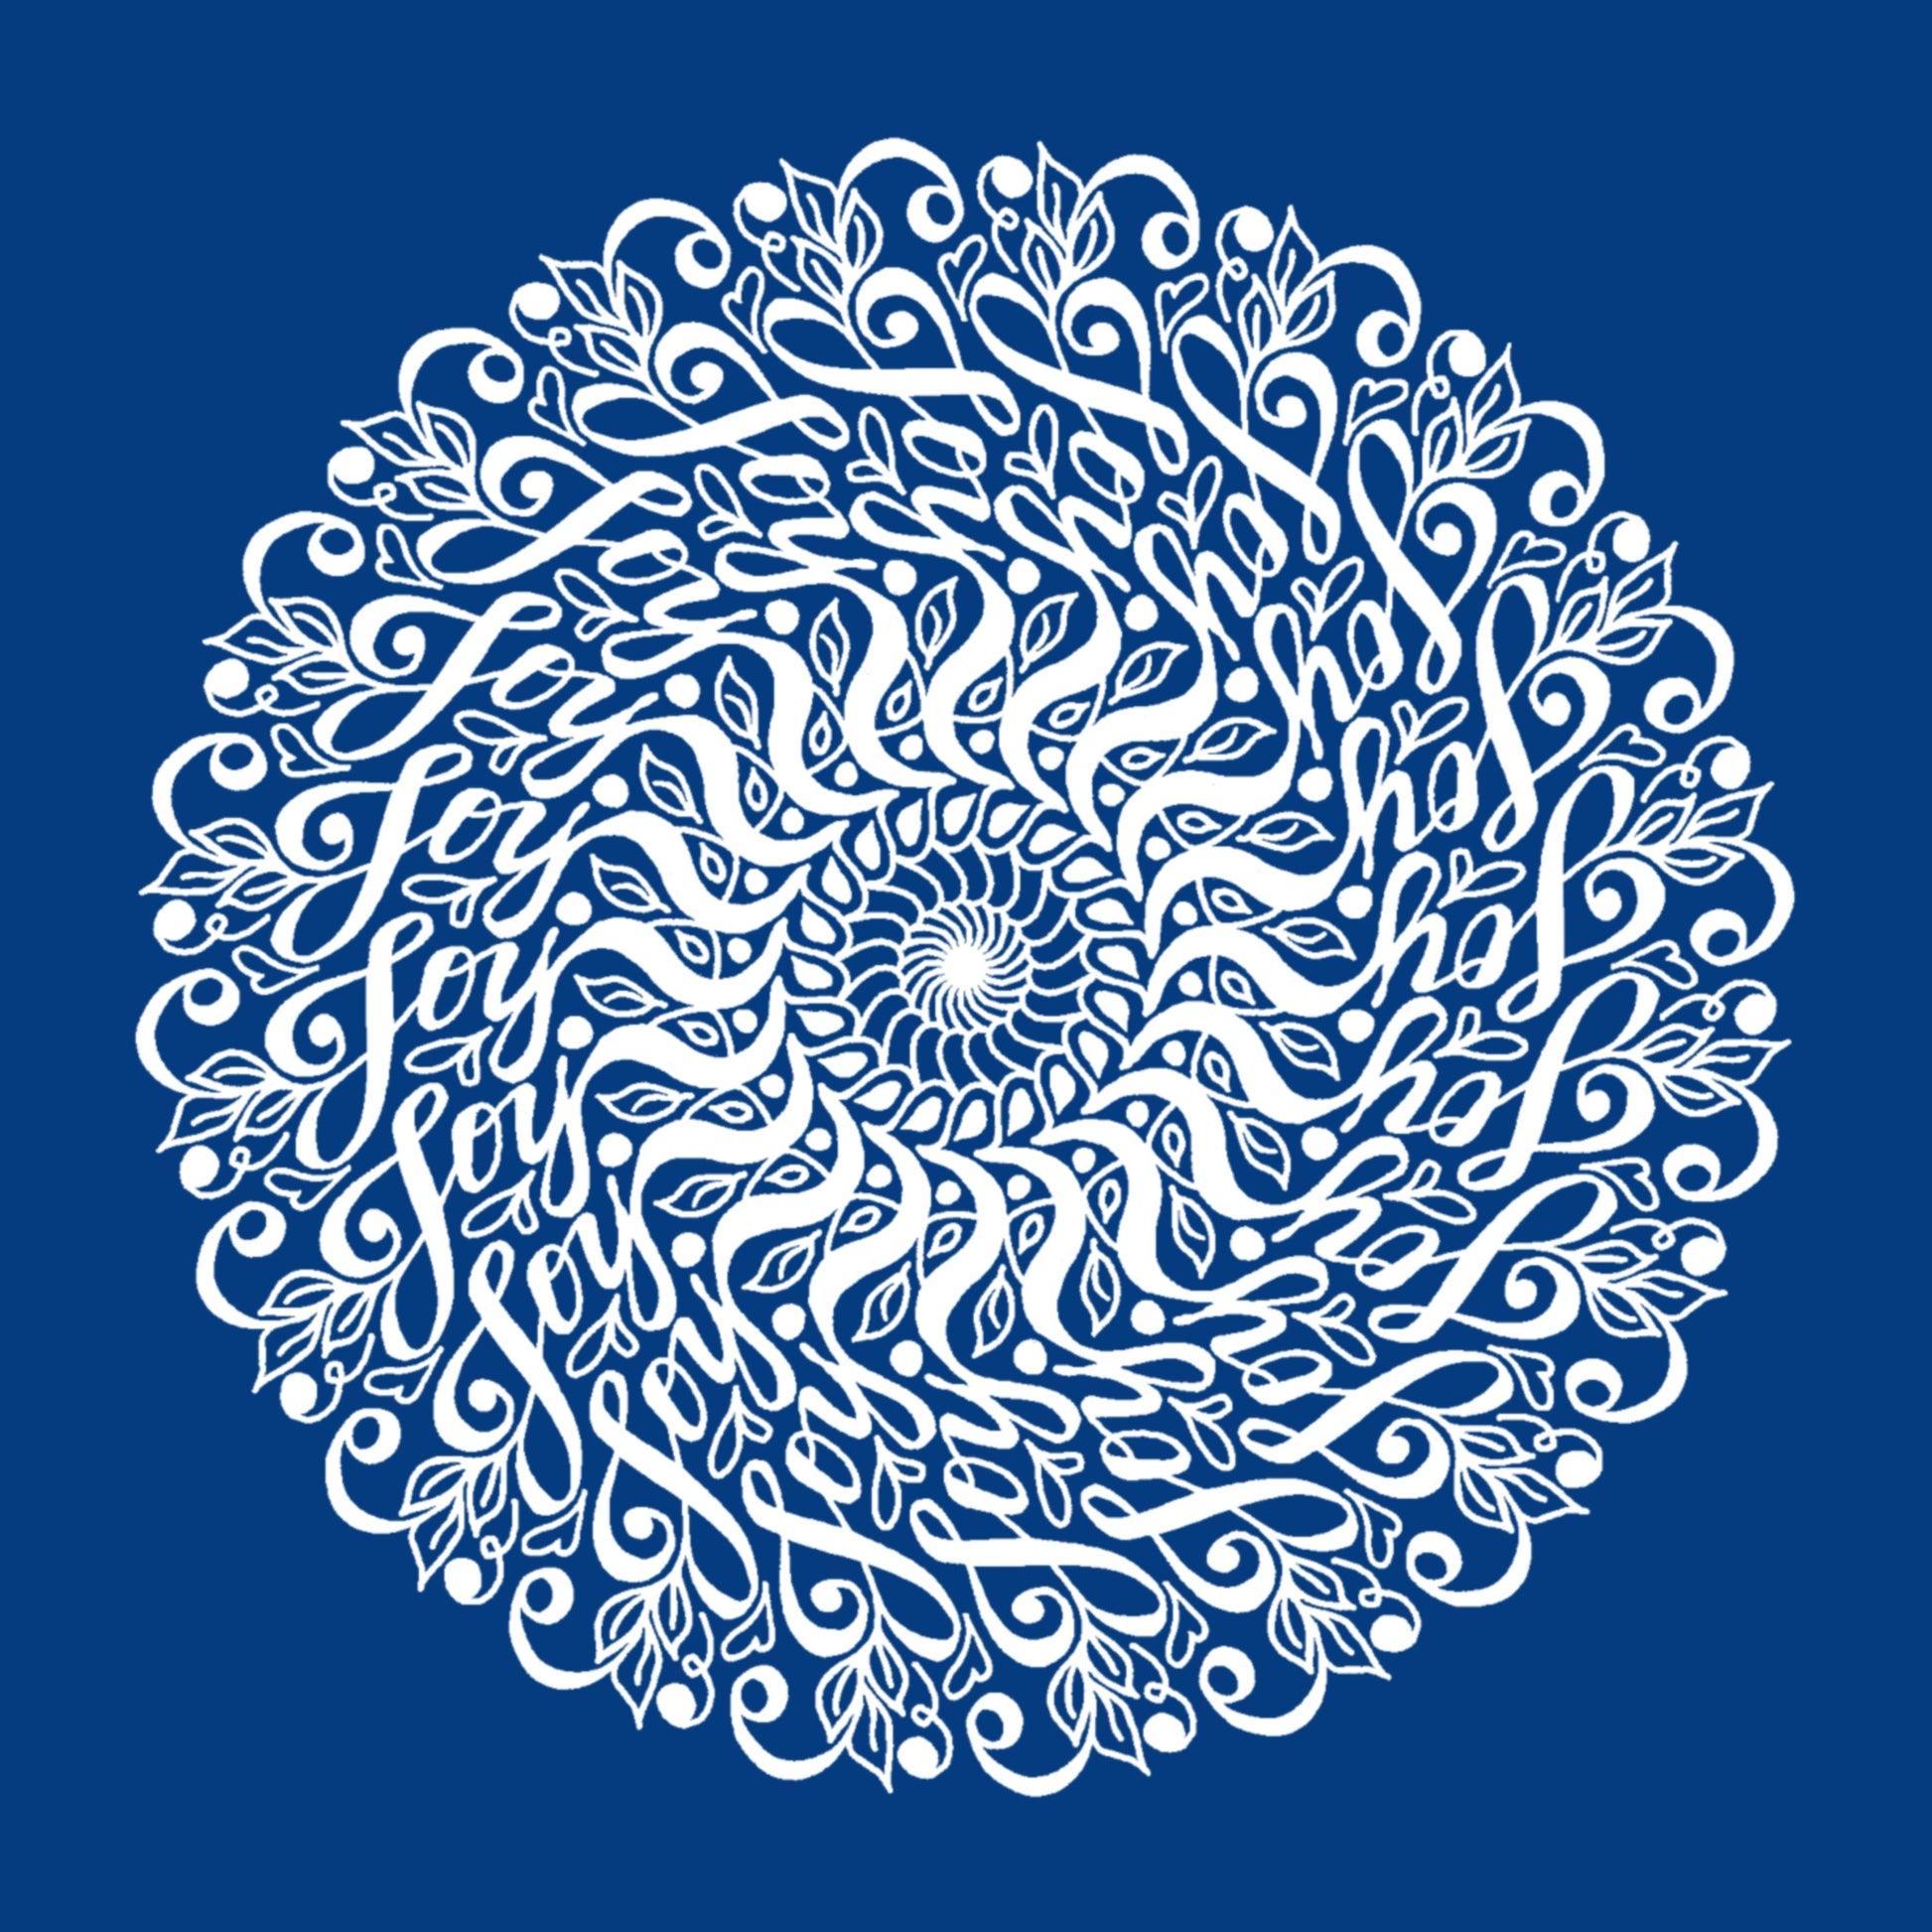 Our "Joy Mandala" greeting card is one of our best sellers and features a deep blue background and a swirling mandala with the word "Joy" hidden within the design.  You can almost get lost in the movement of this elegant pattern!  All of our cards feature the art of Jennifer Knight and are printed on high quality stock locally in Charlottesville, Va.  Newwingstudio.com